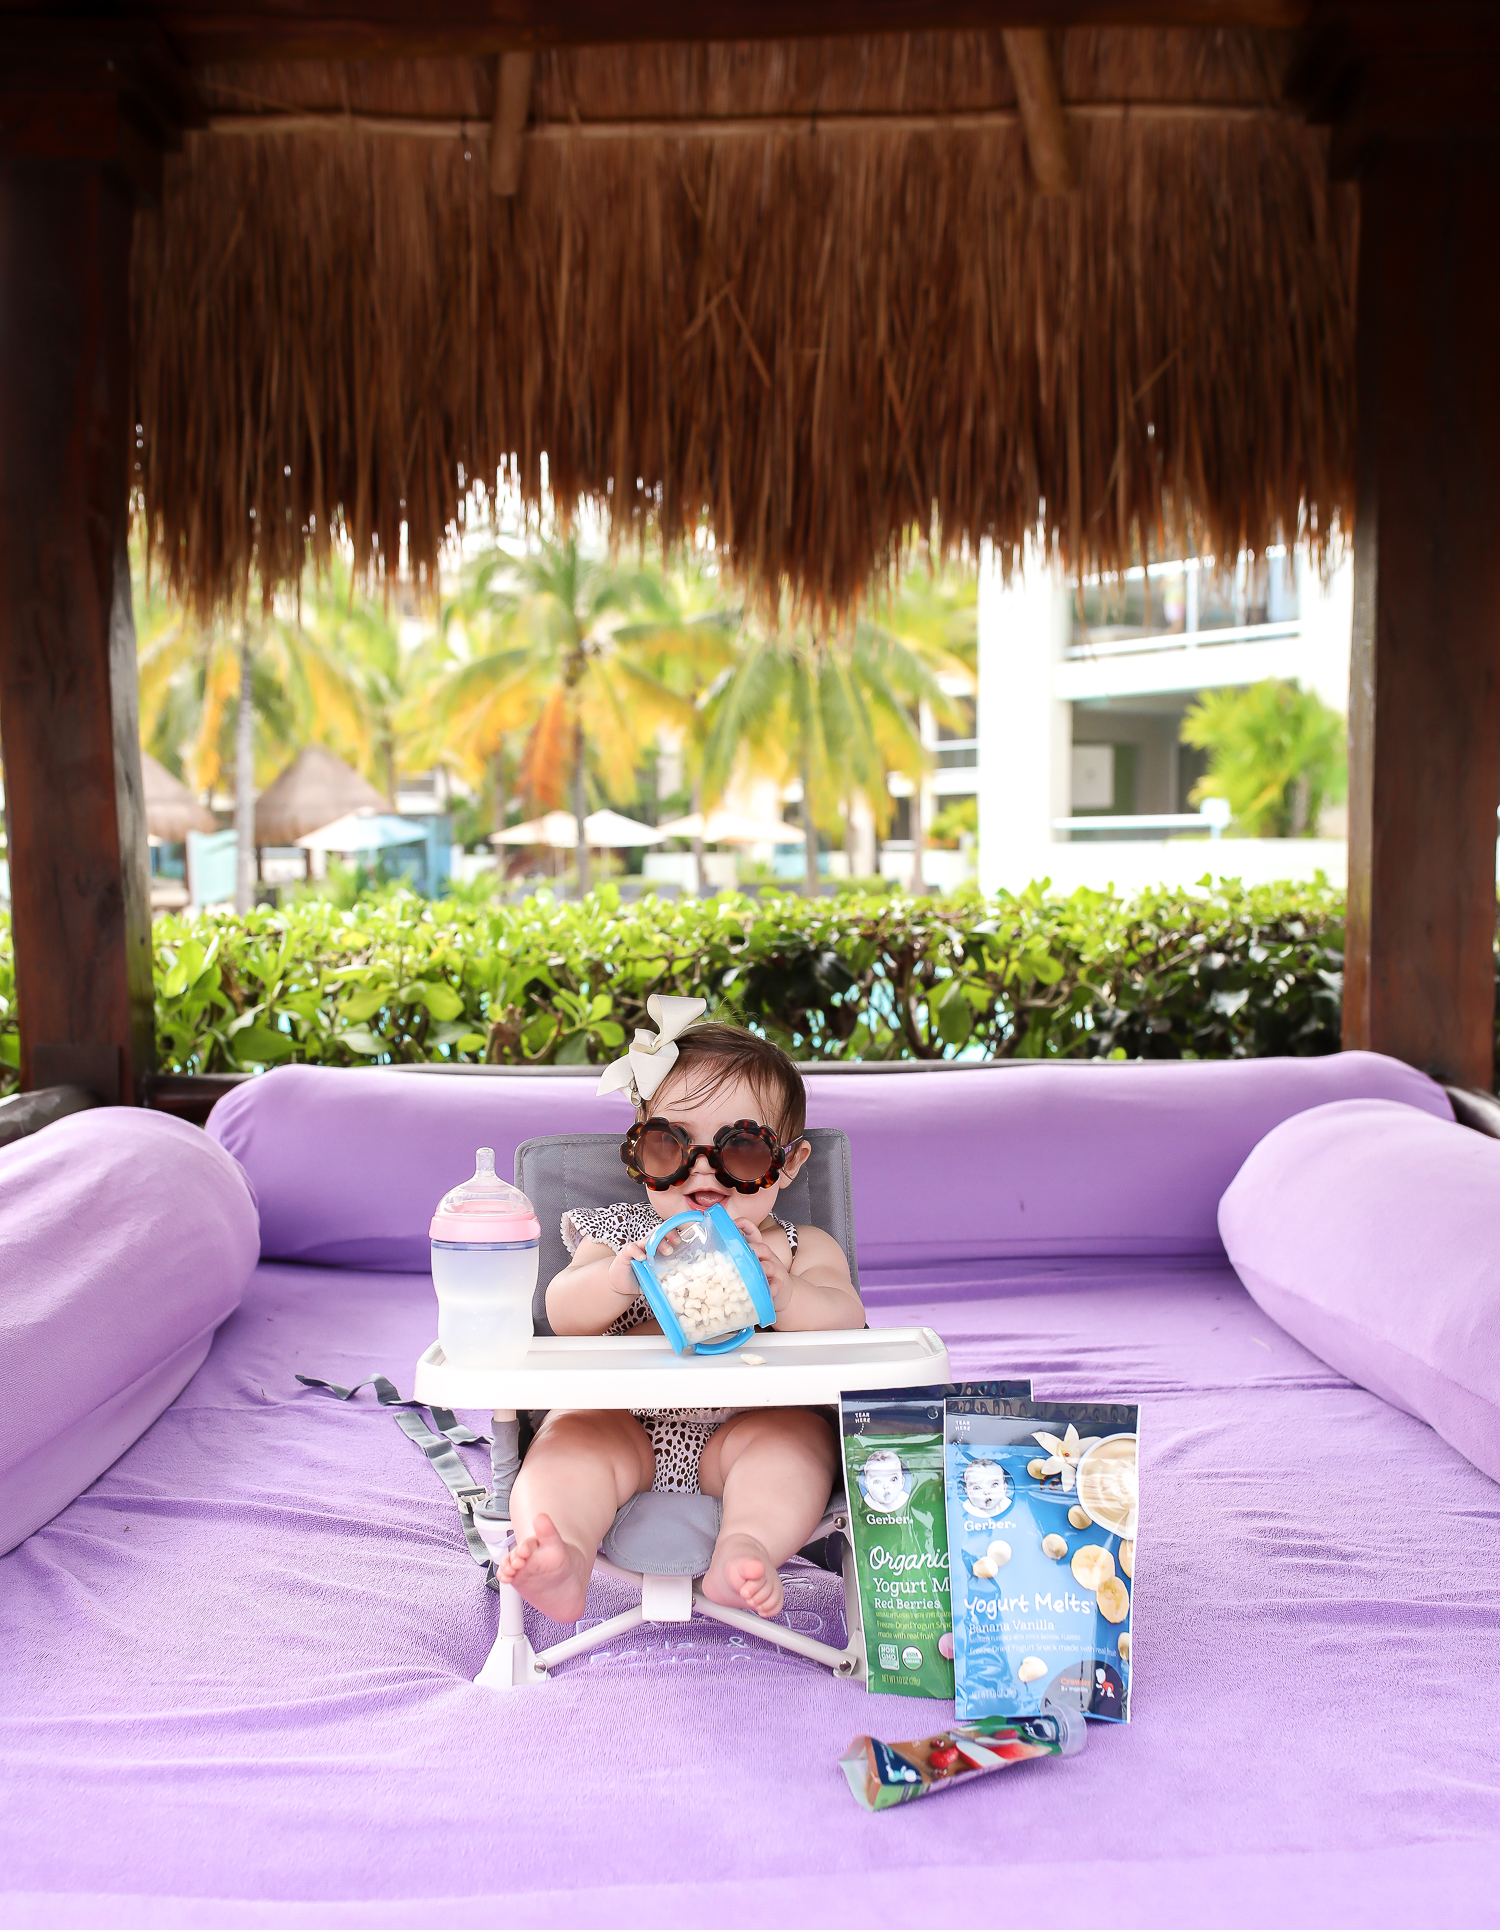 Christmas In Cancun🌟🎄🎁 [+ A Few Baby Travel Must-Haves] by popular Oklahoma travel blog, The Sweetest Thing: image of a baby in Cancun, Mexico sitting in a Walmart hiccapop Omniboost Travel Booster Seat with Tray for Baby holding a Walmart Munchkin Snack Catcher Snack Cup with Gerber Puff cereal snack inside, with a bottle resting on her high chair tray and some Gerber Organic Yogurt melts next to her high chair. 